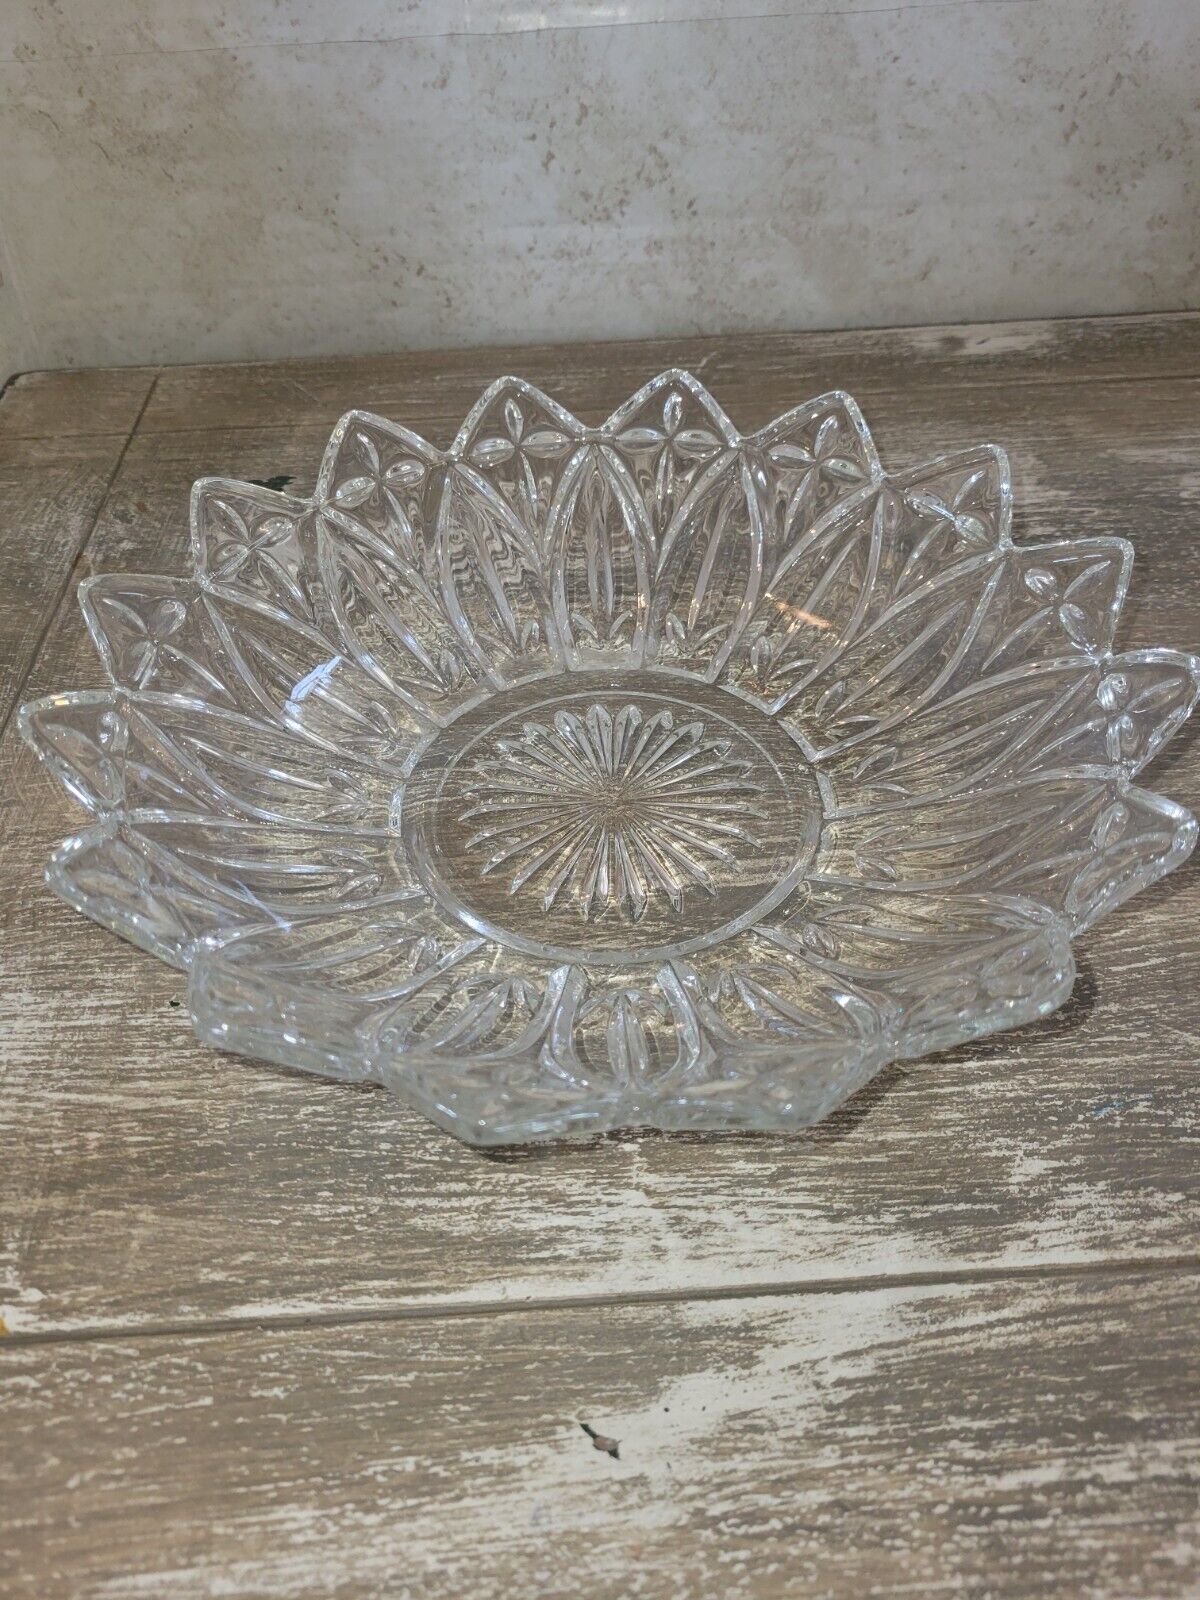 Scalloped Edge Vintage Clear Pressed Glass Serving Shallow Bowl Platter